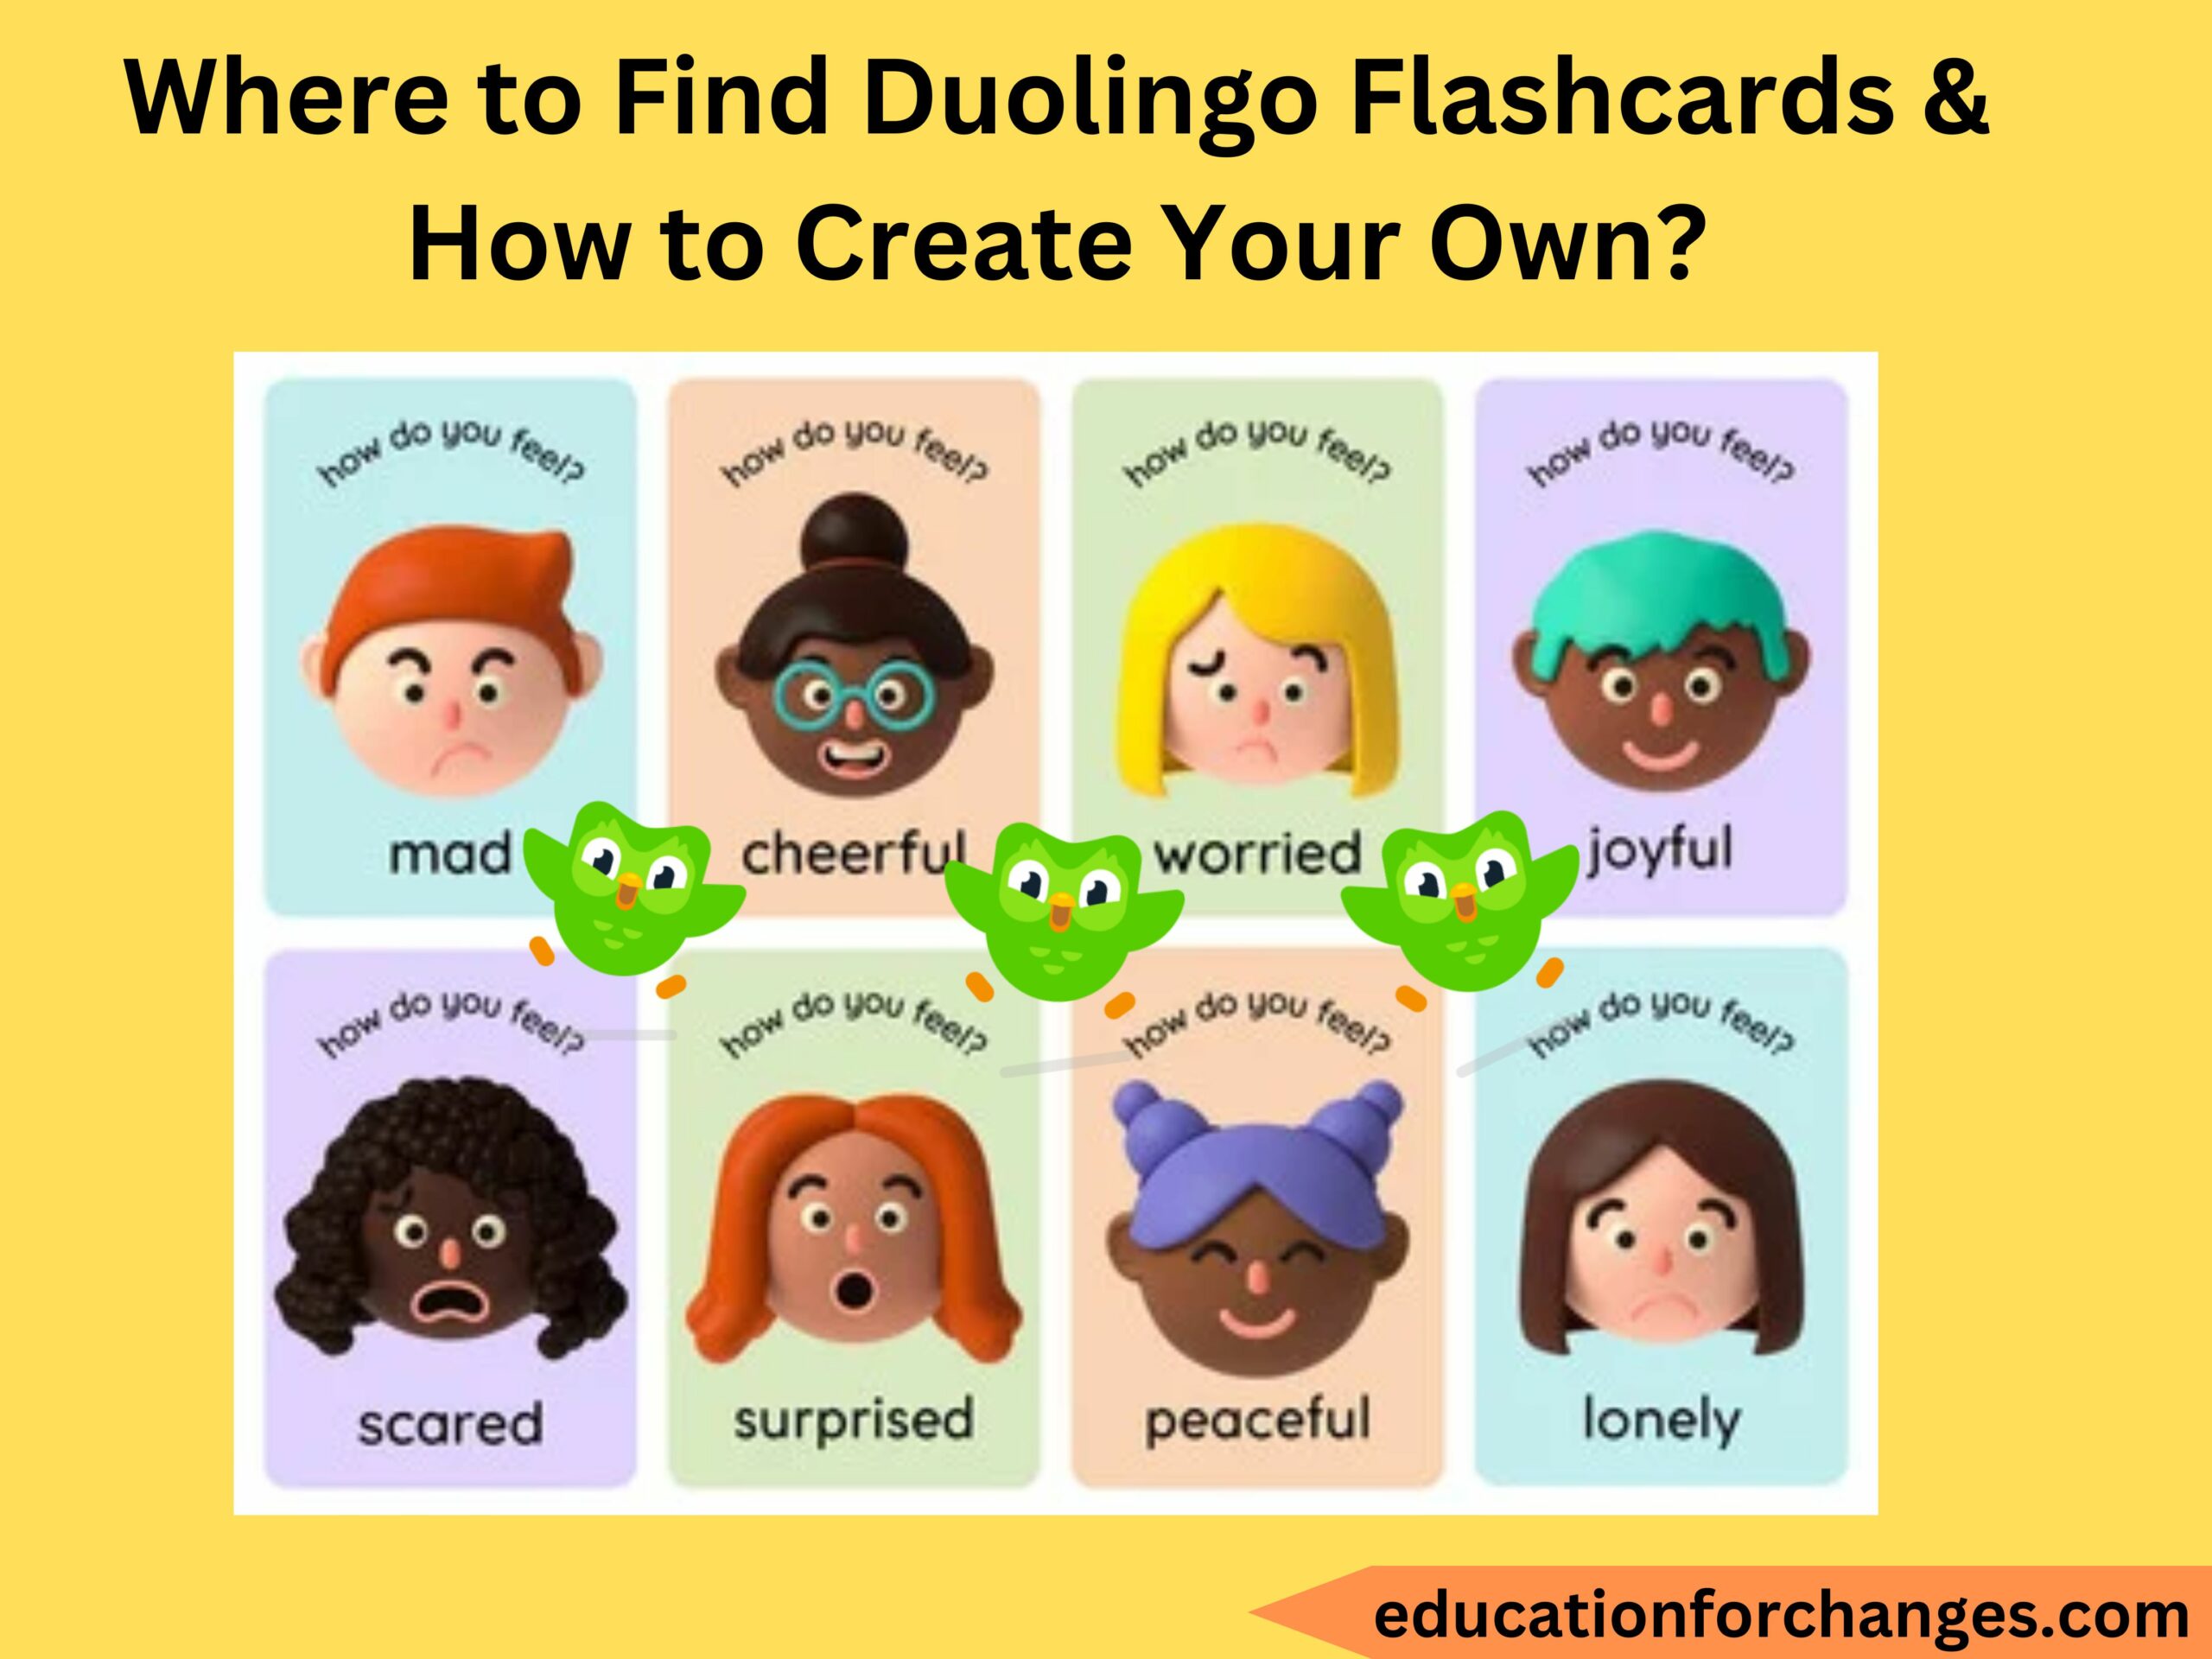 Where to Find Duolingo Flashcards & How to Create Your Own